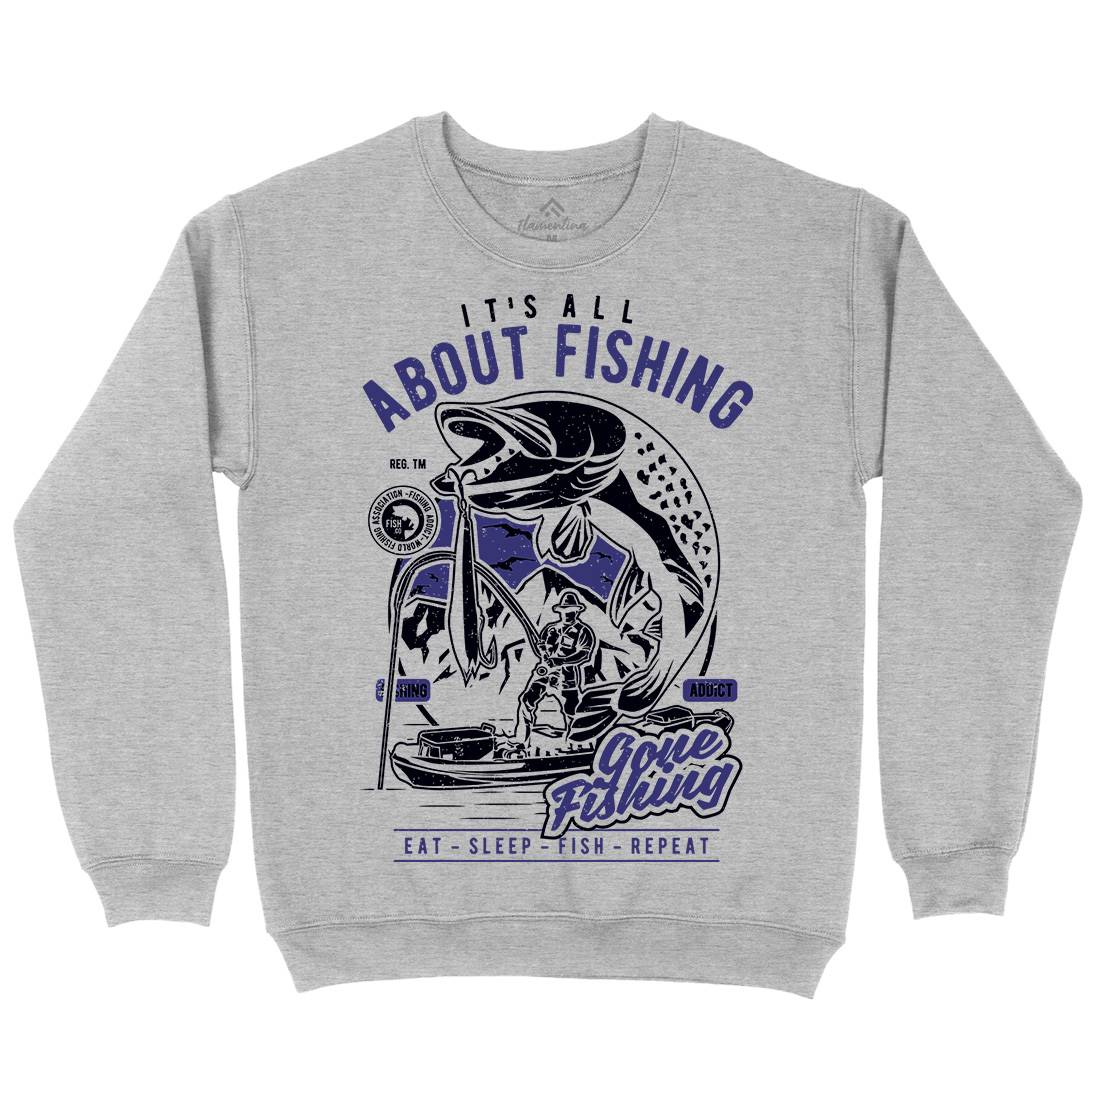 All About Mens Crew Neck Sweatshirt Fishing A604